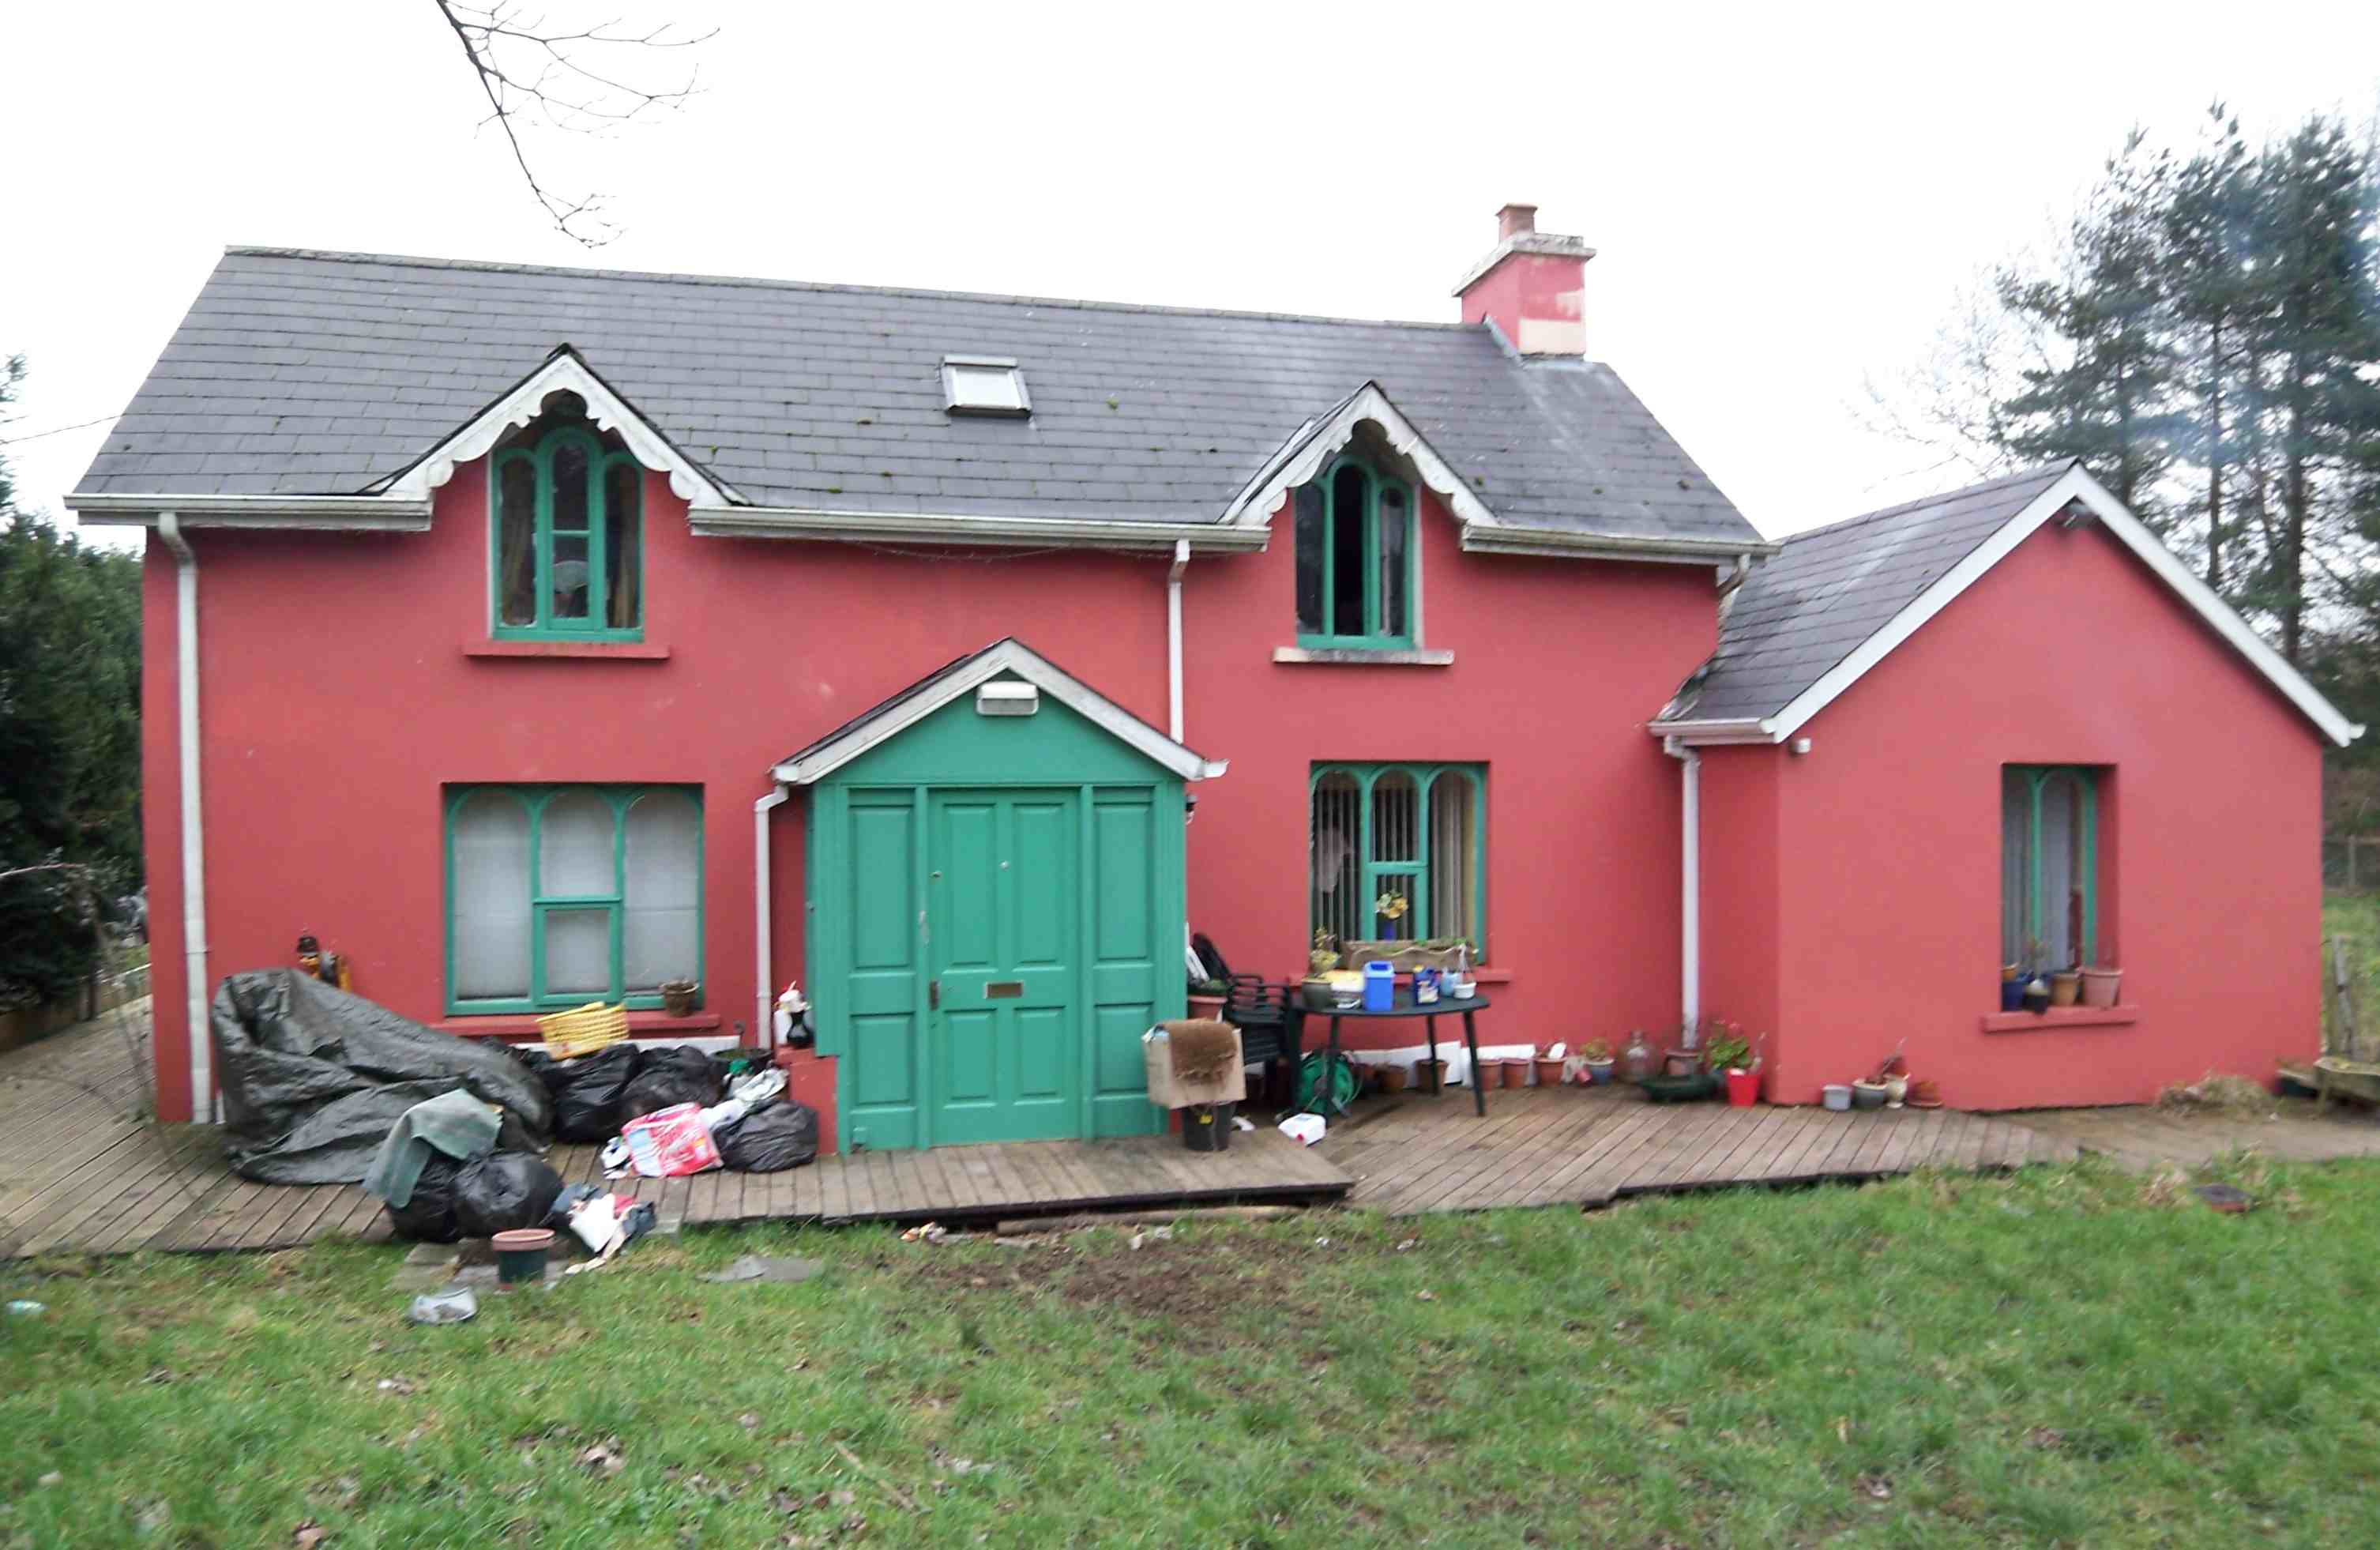 RVB 'Abbey View' Cottage [front].jpg